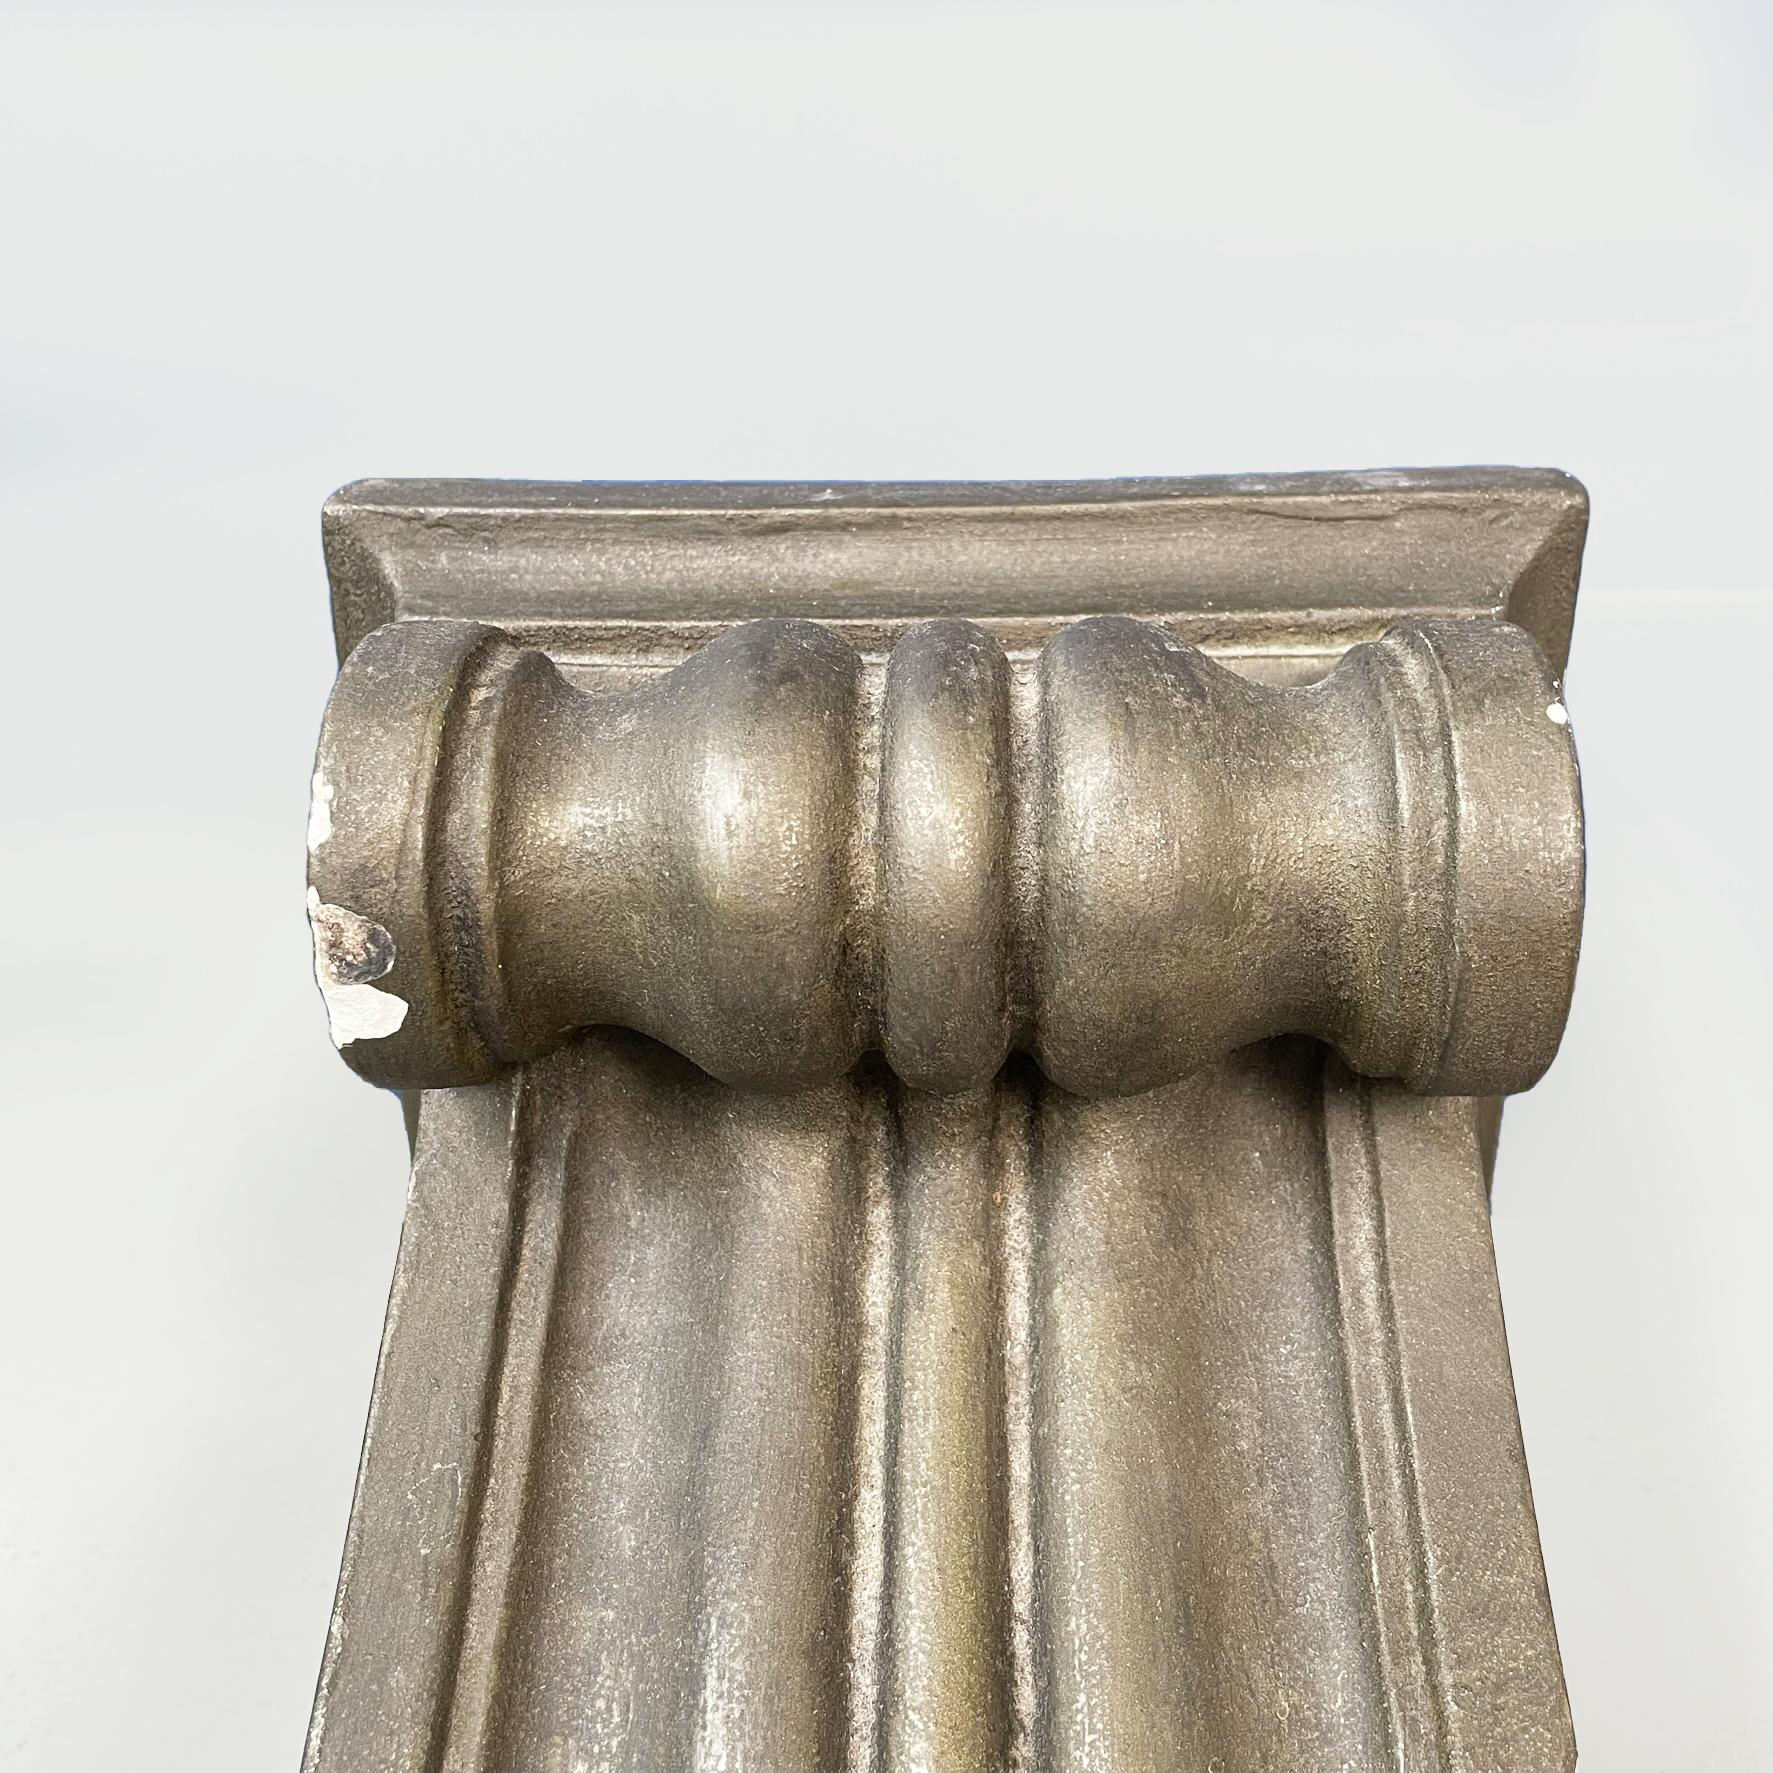 Italian Modern Finely Worked Capital in Grey Plaster, 1990s For Sale 5